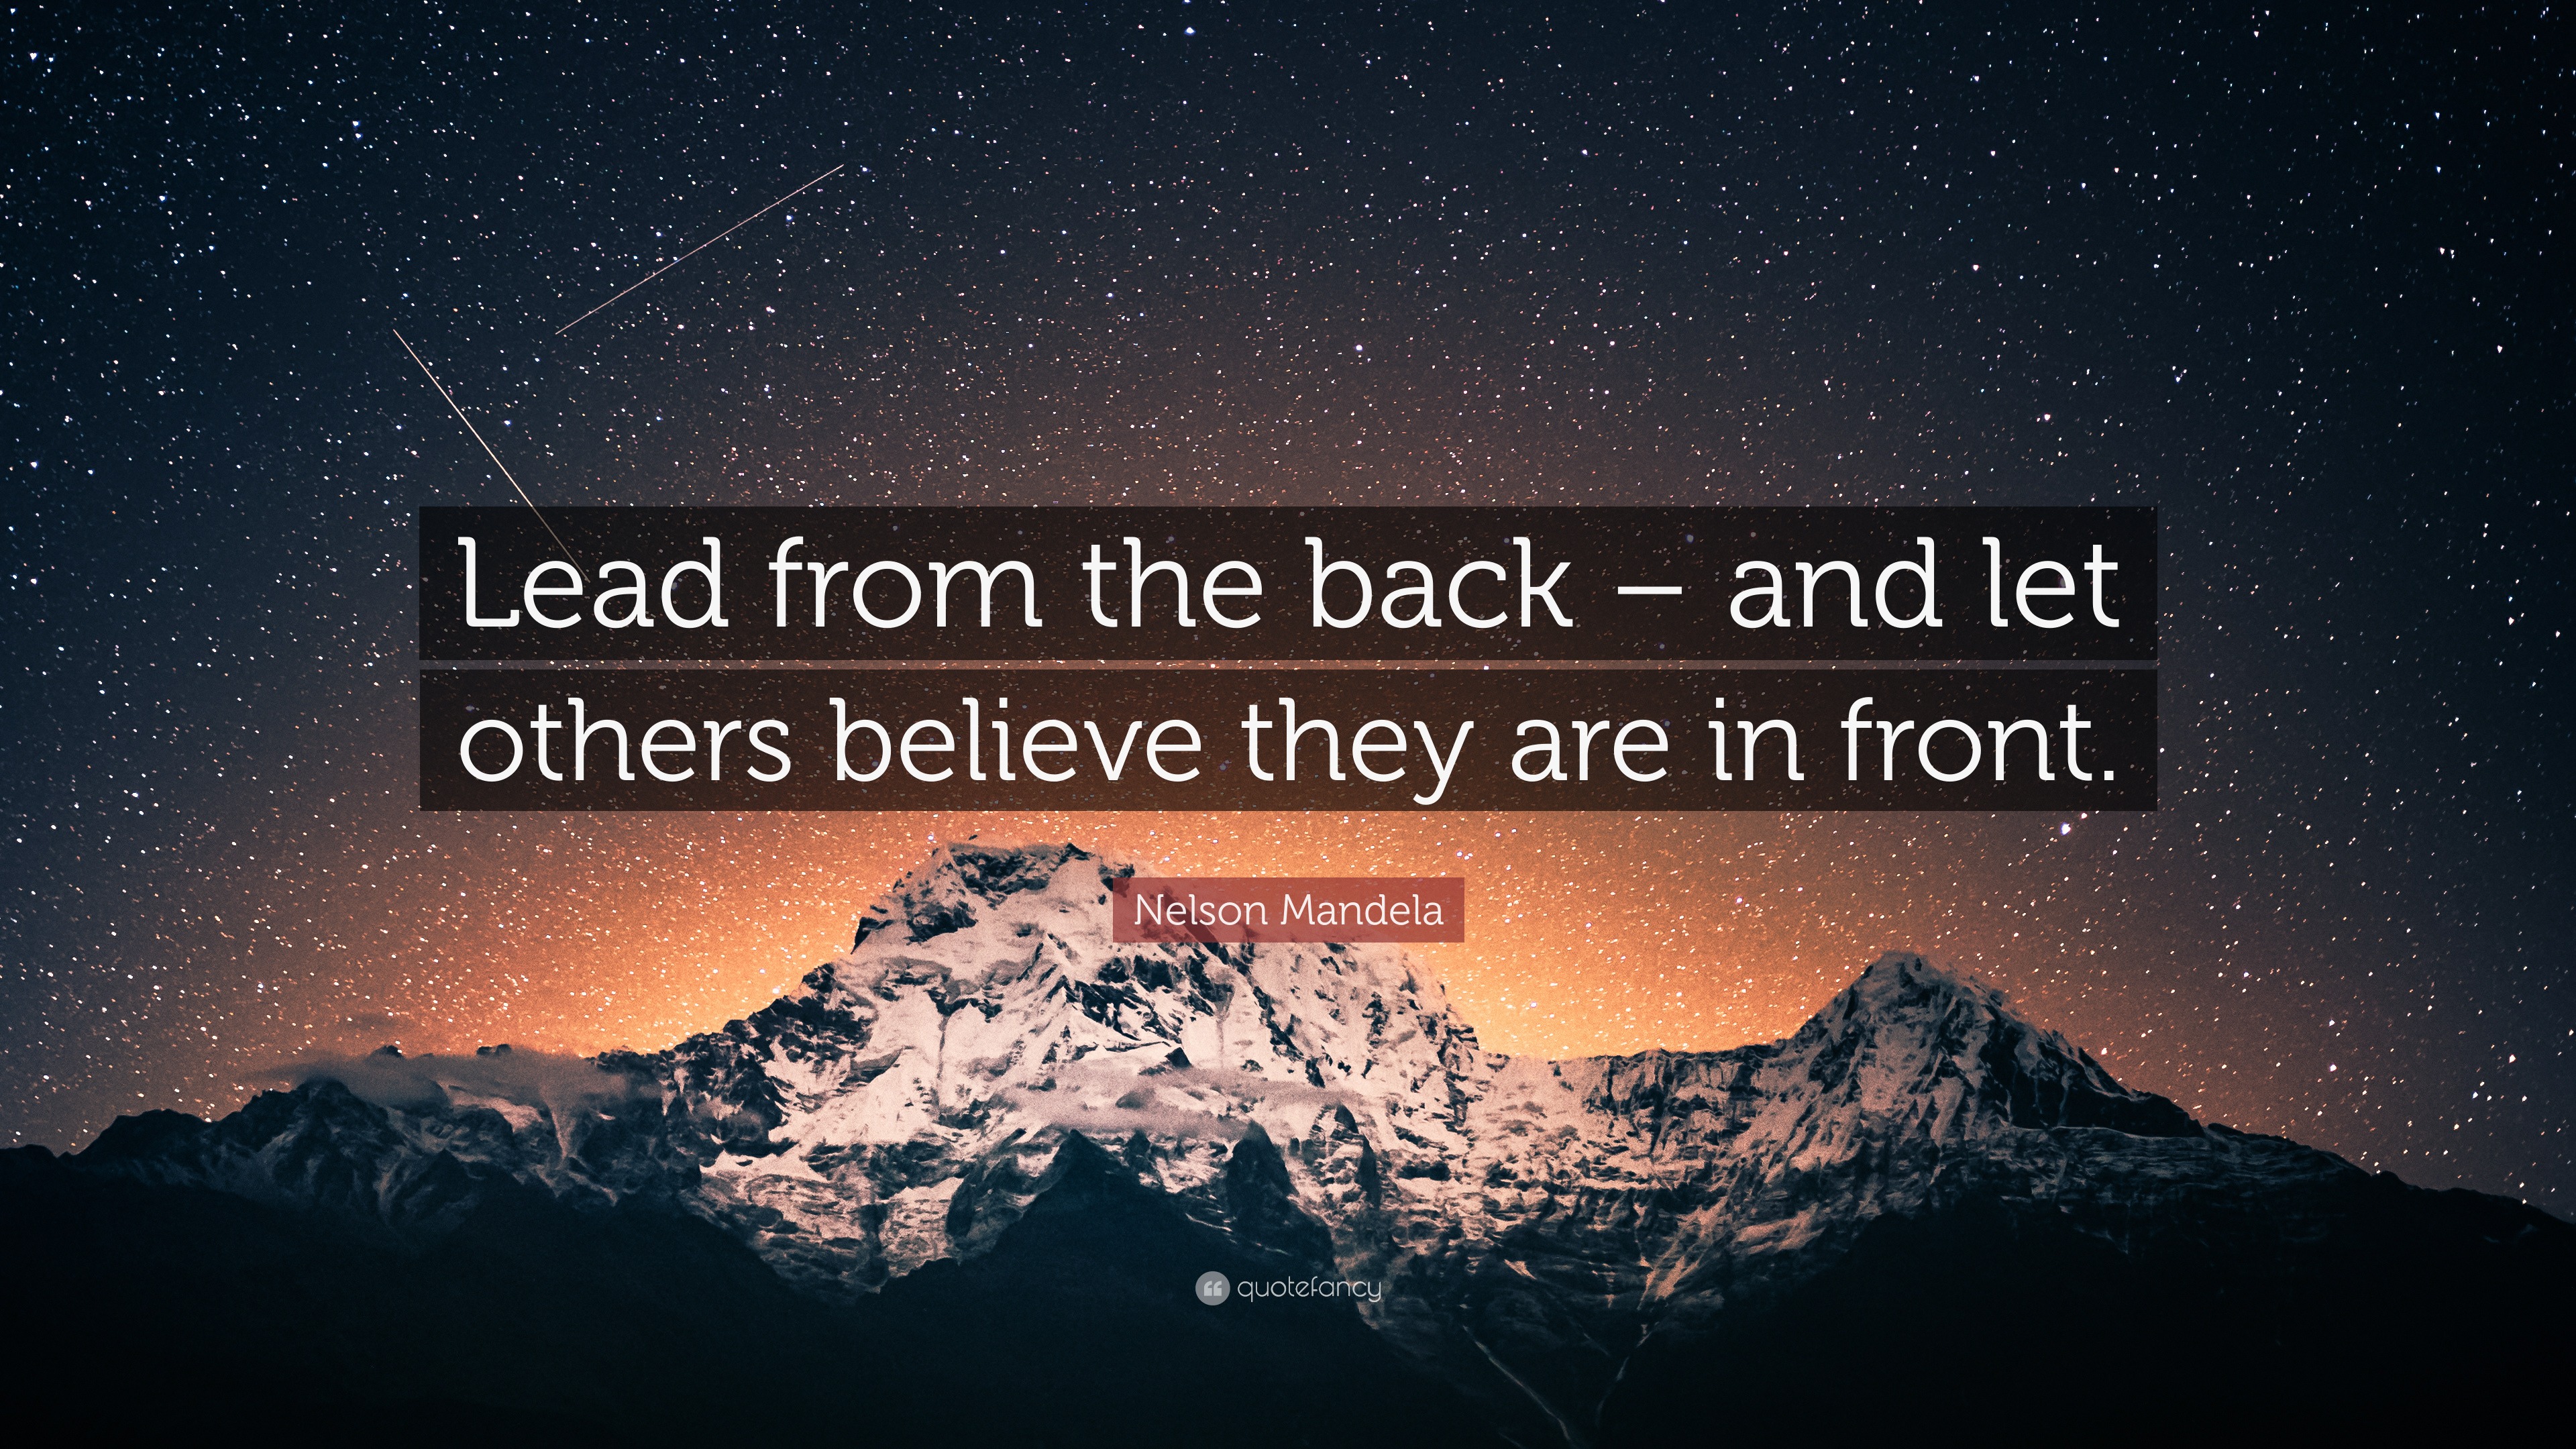 Nelson Mandela Quote: “Lead from the back – and let others believe they